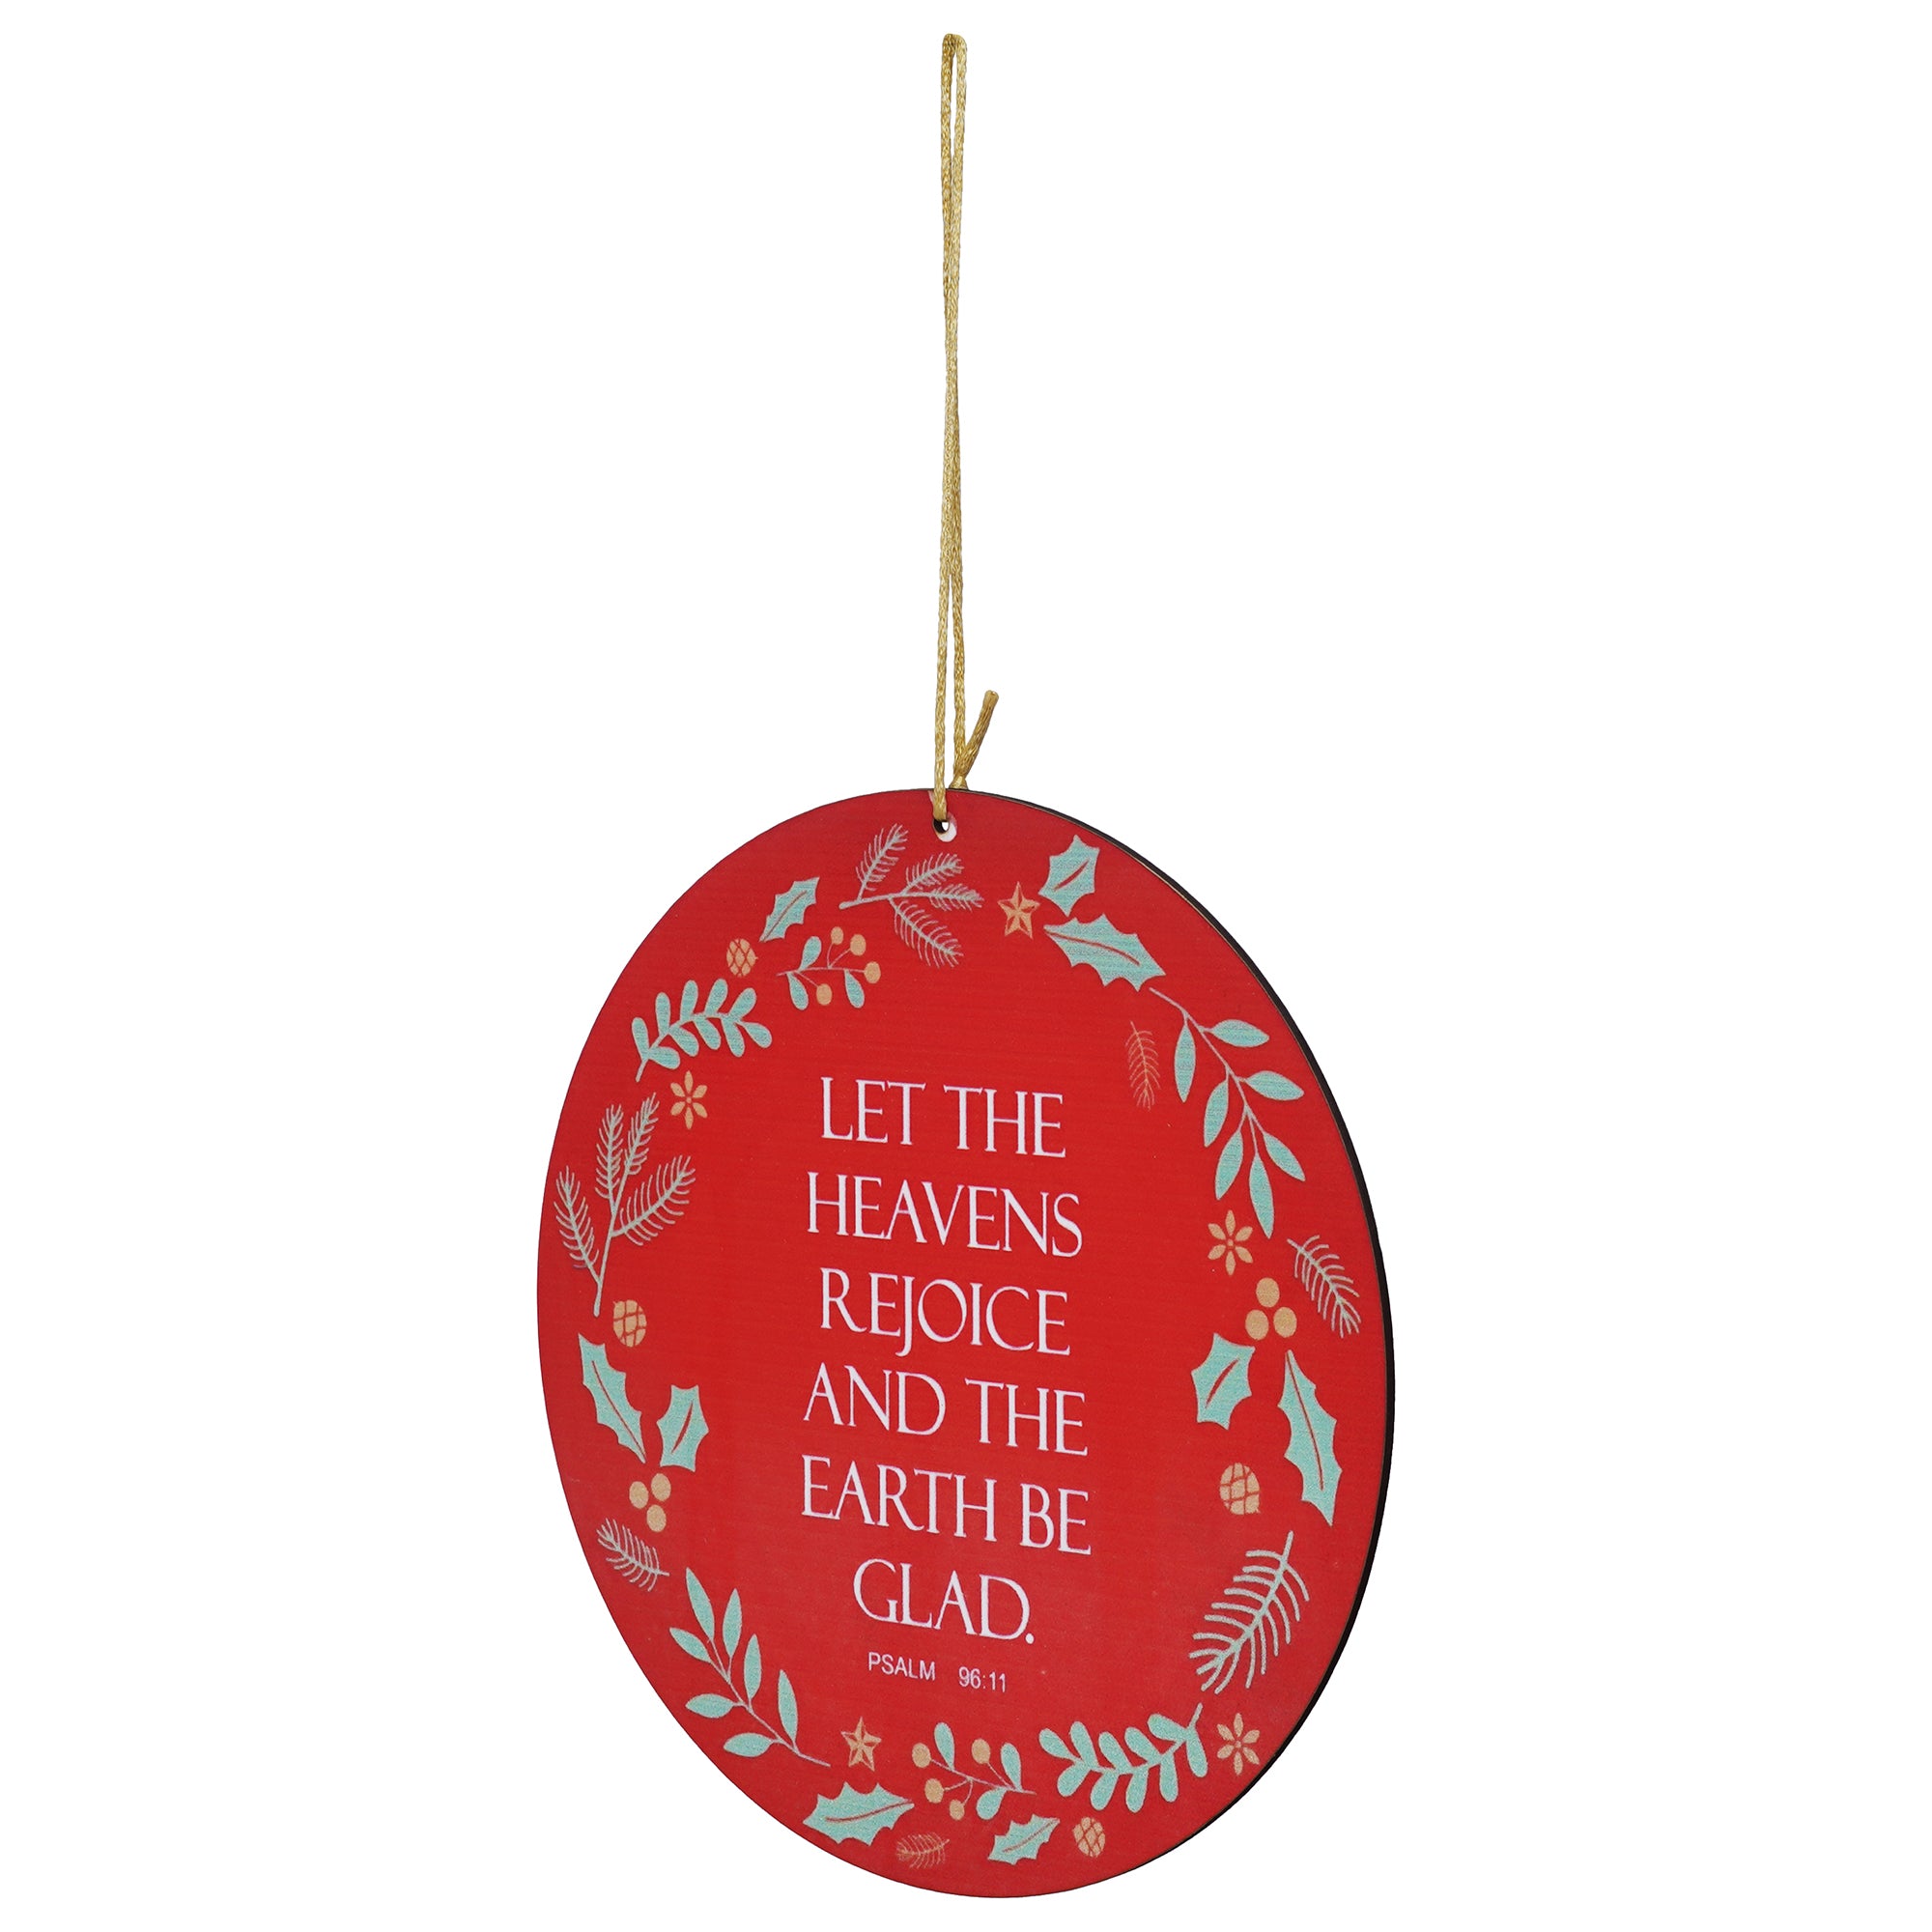 eCraftIndia "LET THE HEAVENS REJOICE AND THE EARTH BE GLAD. PSALM 96:11" Printed Merry Christmas Wooden Door Wall Hanging Ornaments for Home Decoration (Red, Green, White) 7